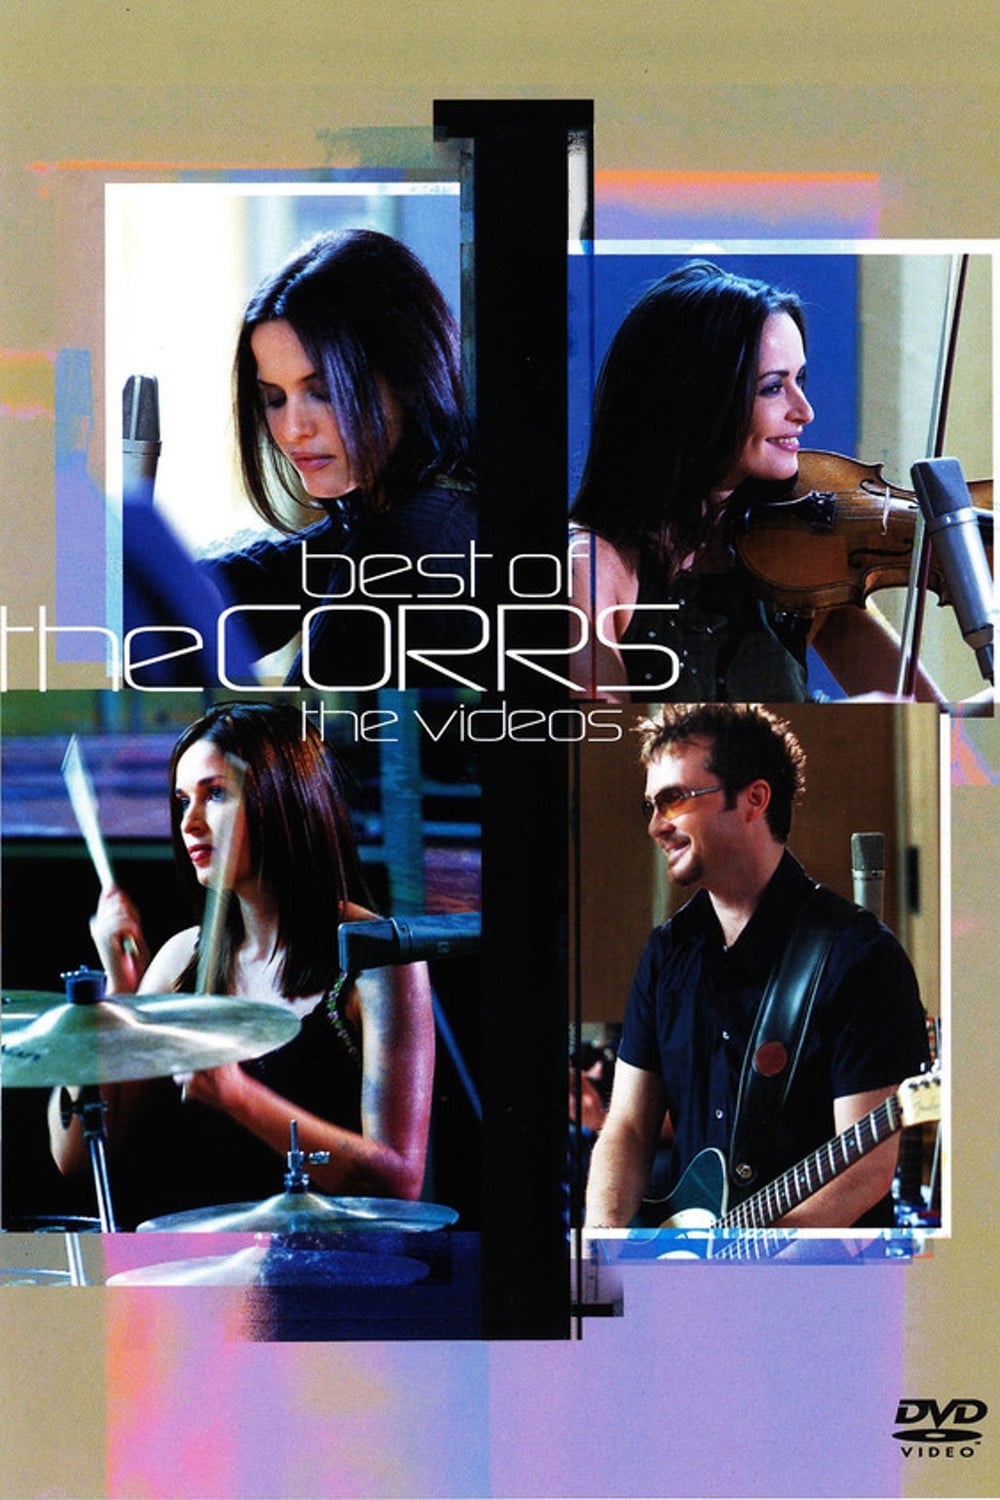 The Corrs: Best of The Corrs - The Videos (2002)